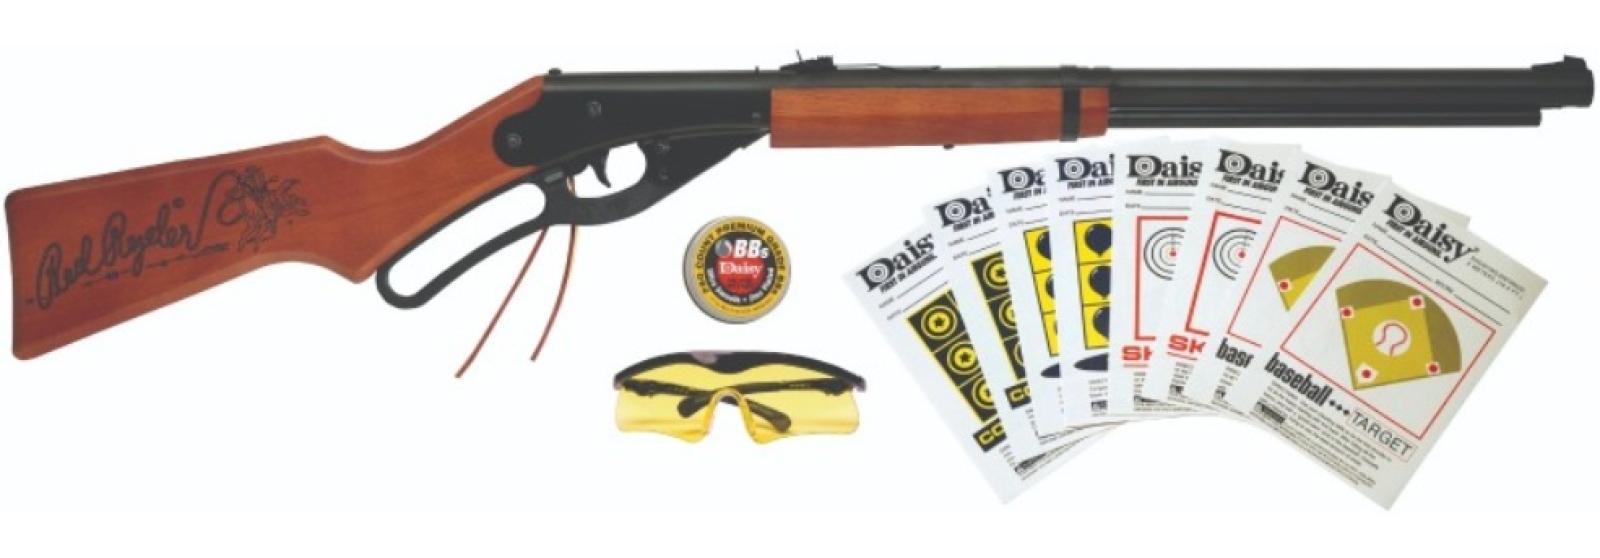 Daisy Youth Red Ryder Shooting Kit